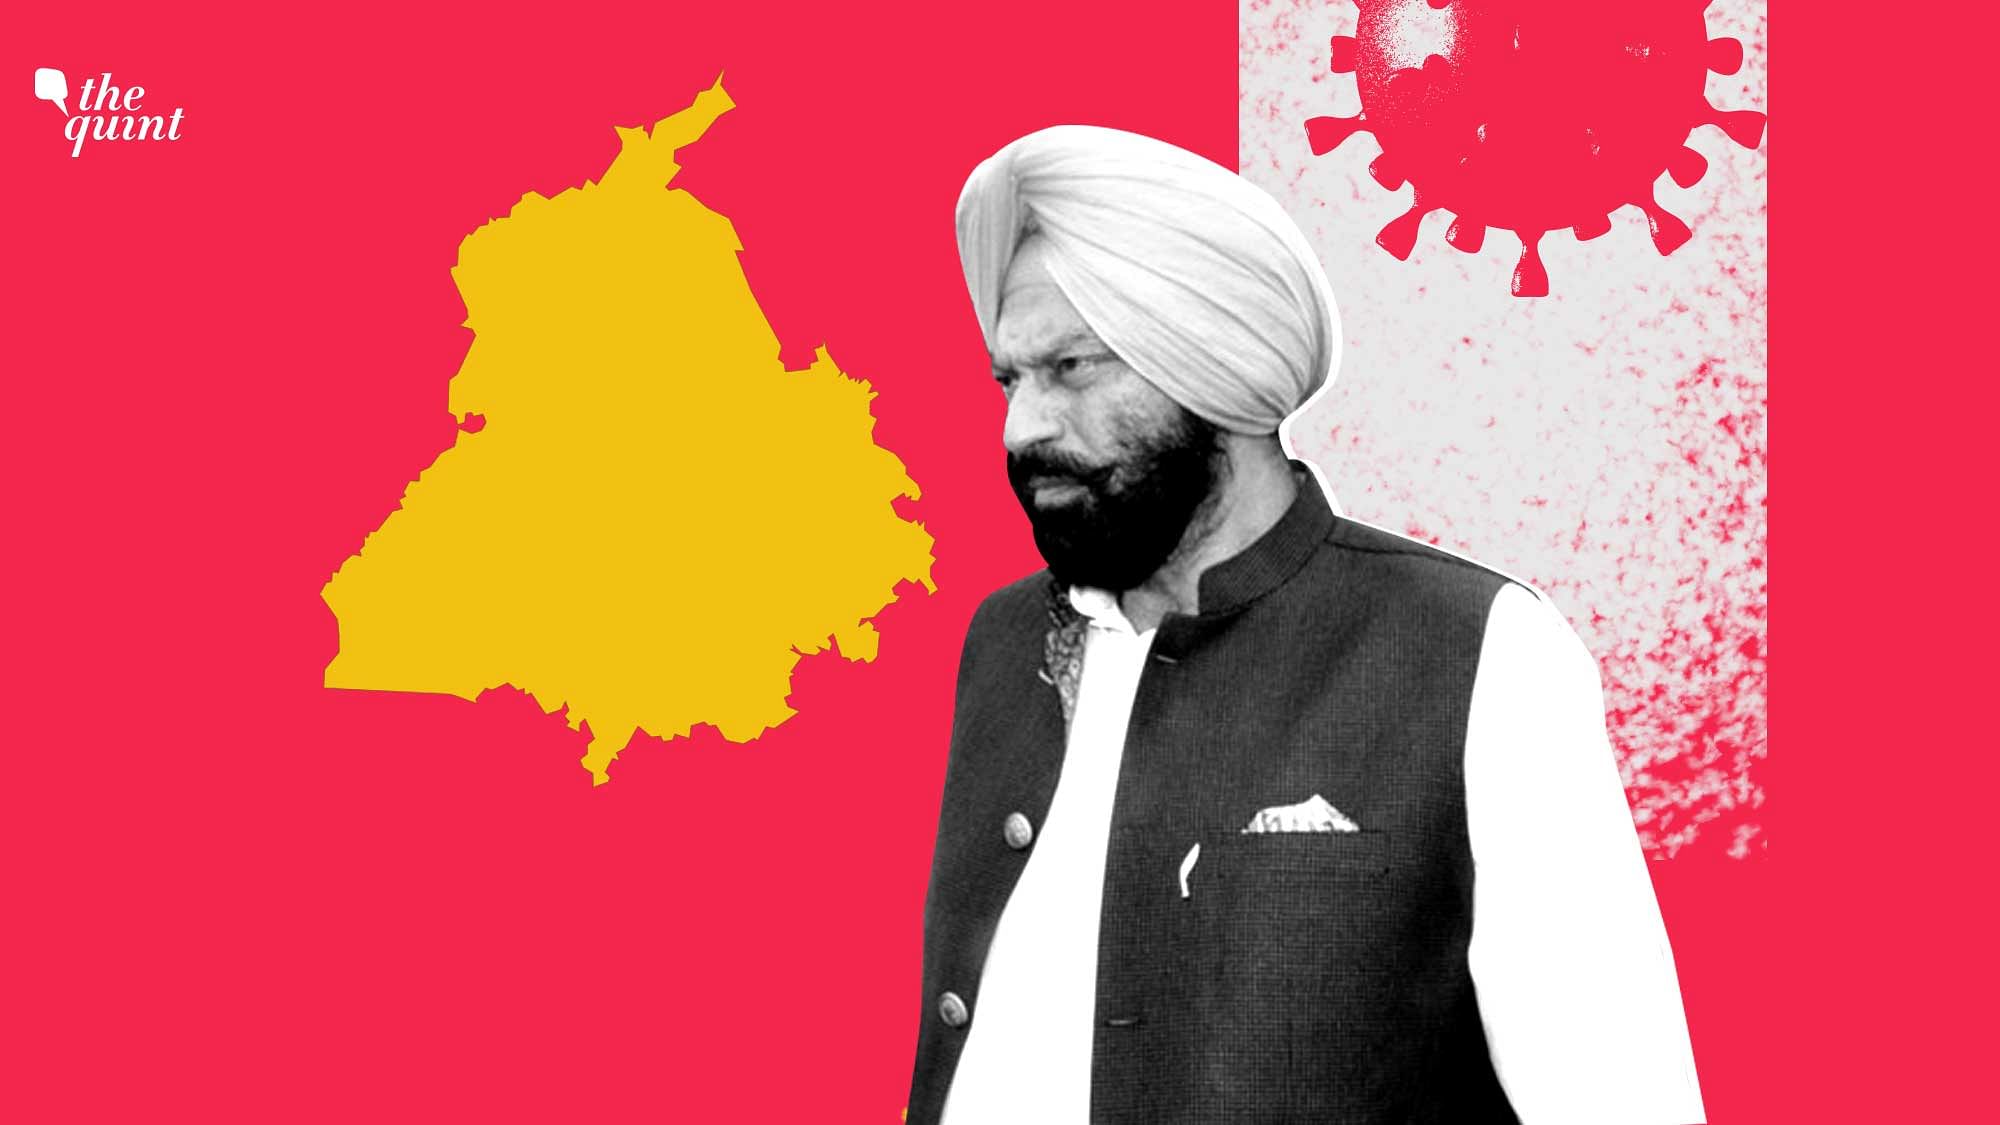 In this interview with The Quint we ask Punjab’s NRI Affairs Minister Rana Gurmit Singh Sodhi if his ministry has been tracking the movement of NRIs, how many NRIs who entered India between January and April were tested and how many are yet to register with the administration.